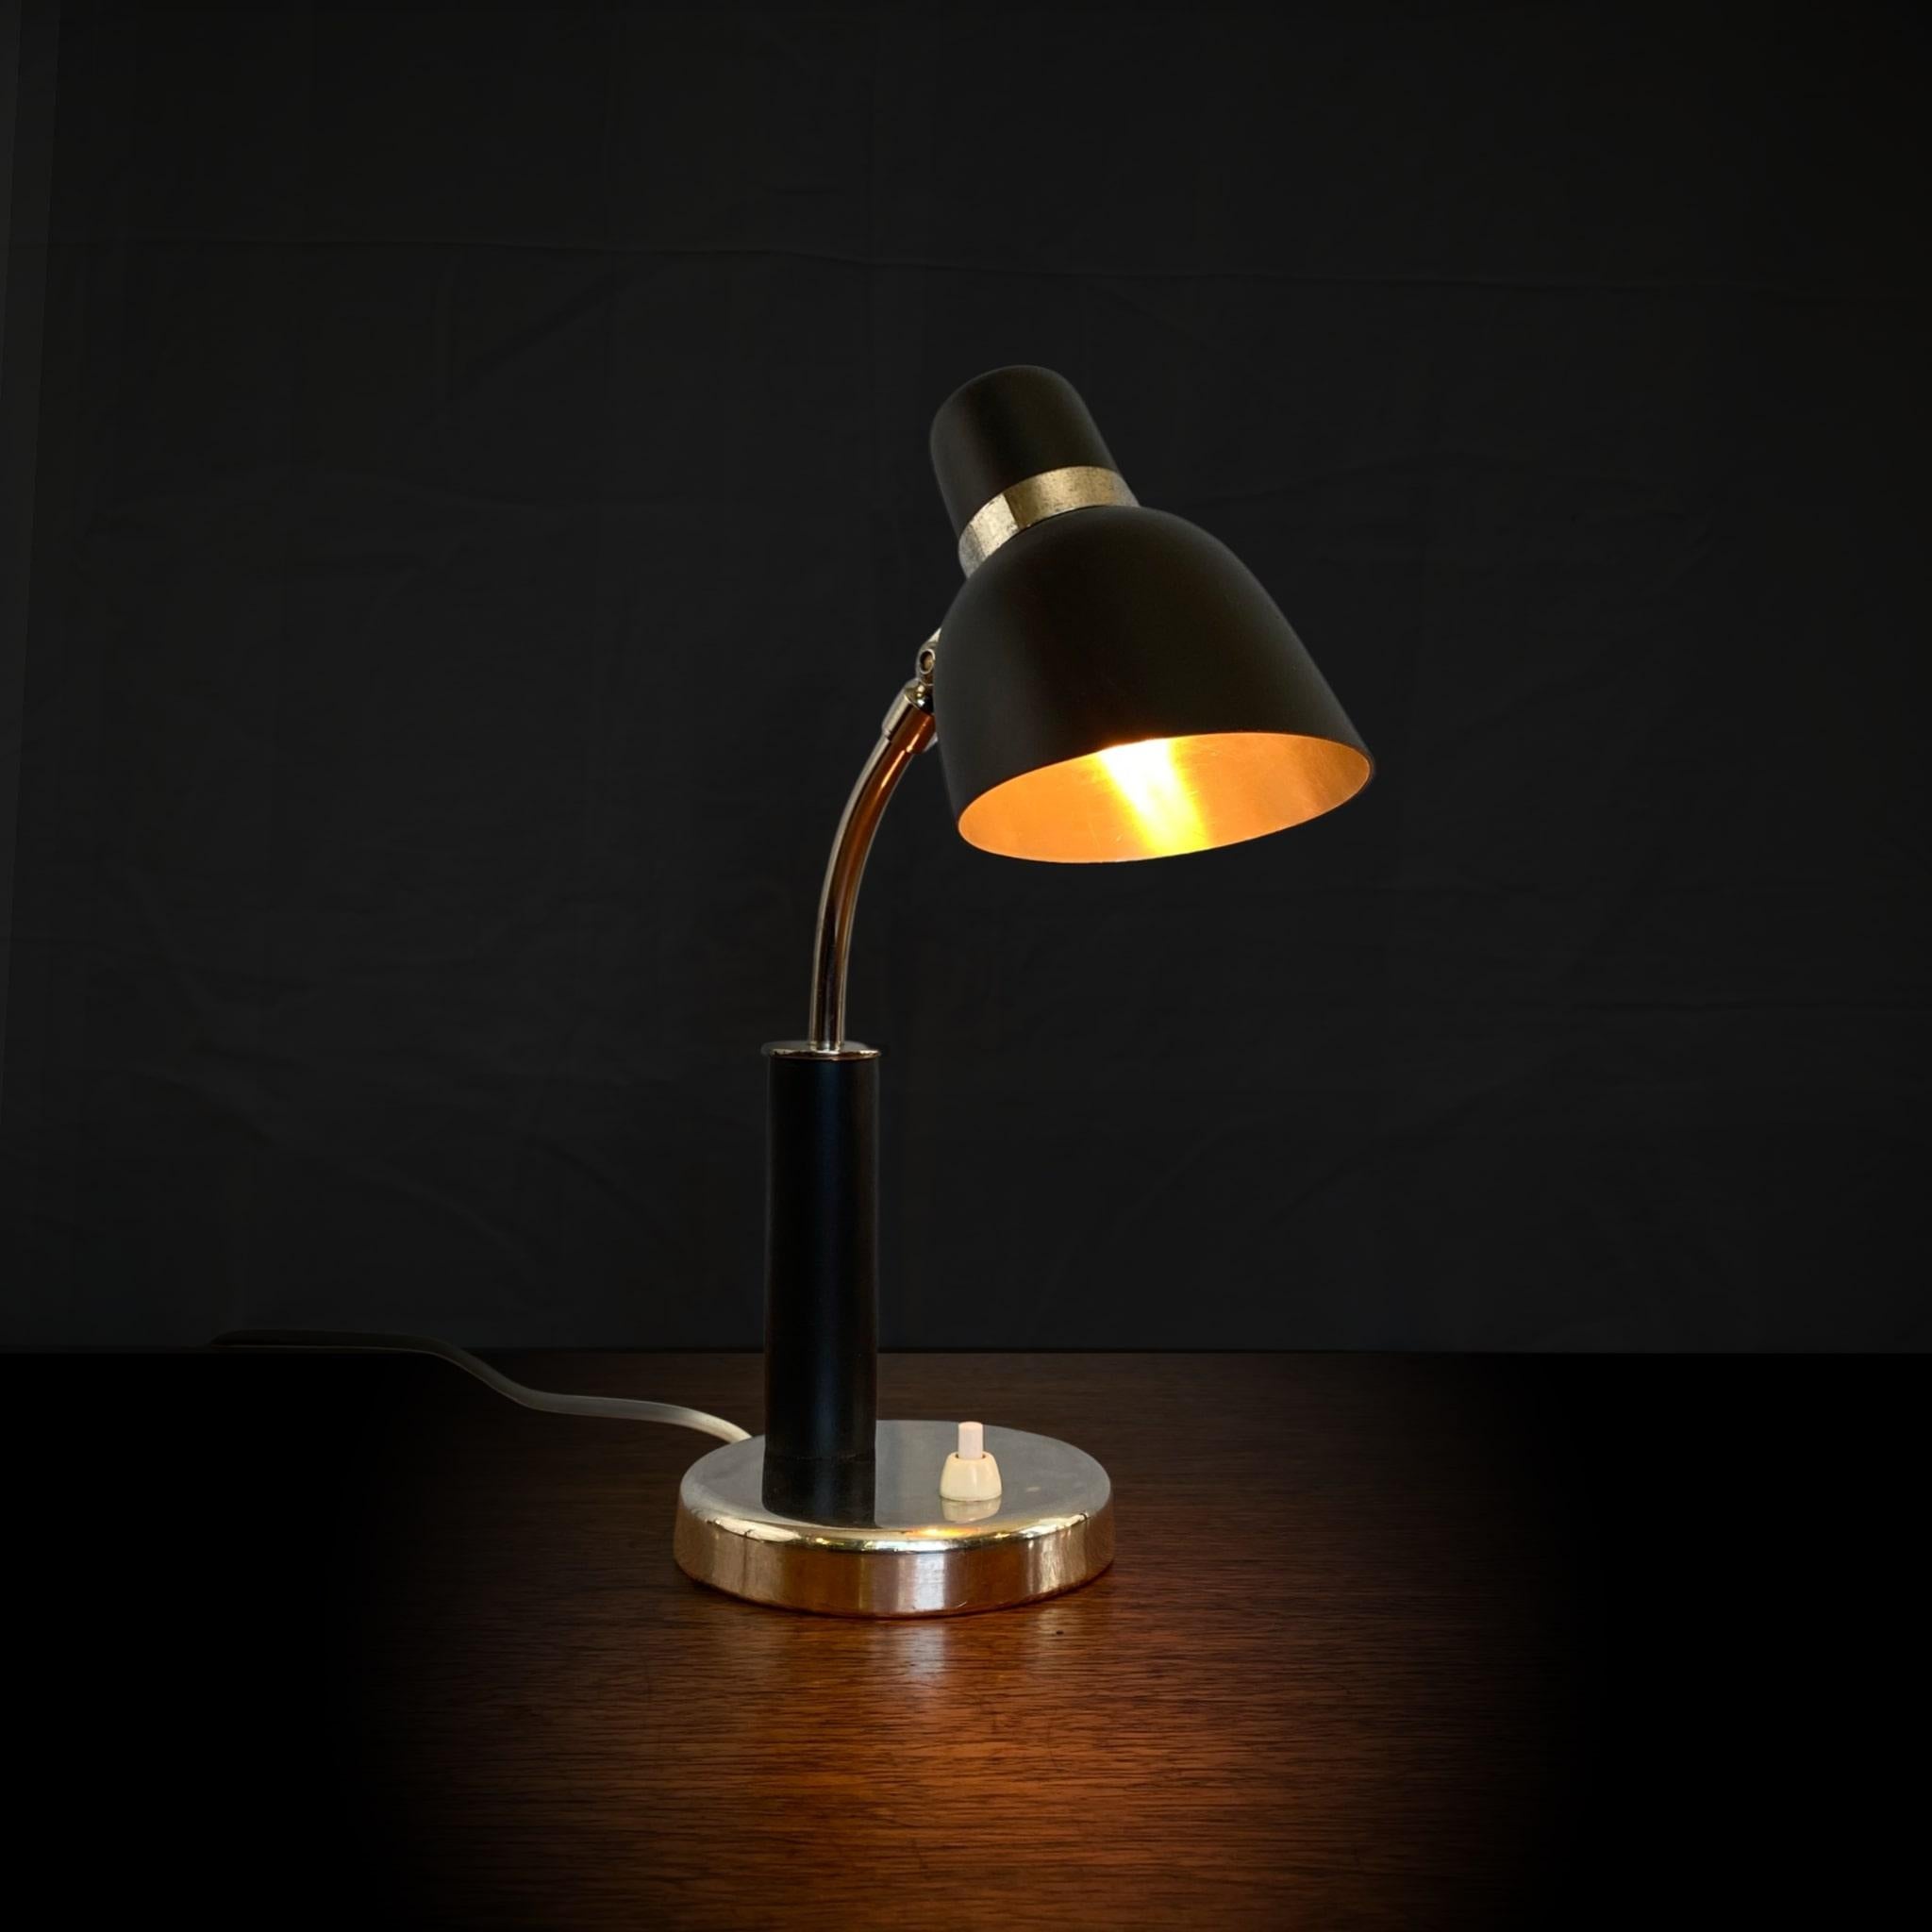 Petite table lamp, also functioning as a wall lamp, produced by the lighting department of the Swedish department store Nordiska Kompaniet in the 1930s, possibly designed by Erik Tidstrand. Made from steel and chrome metal with wooden details.